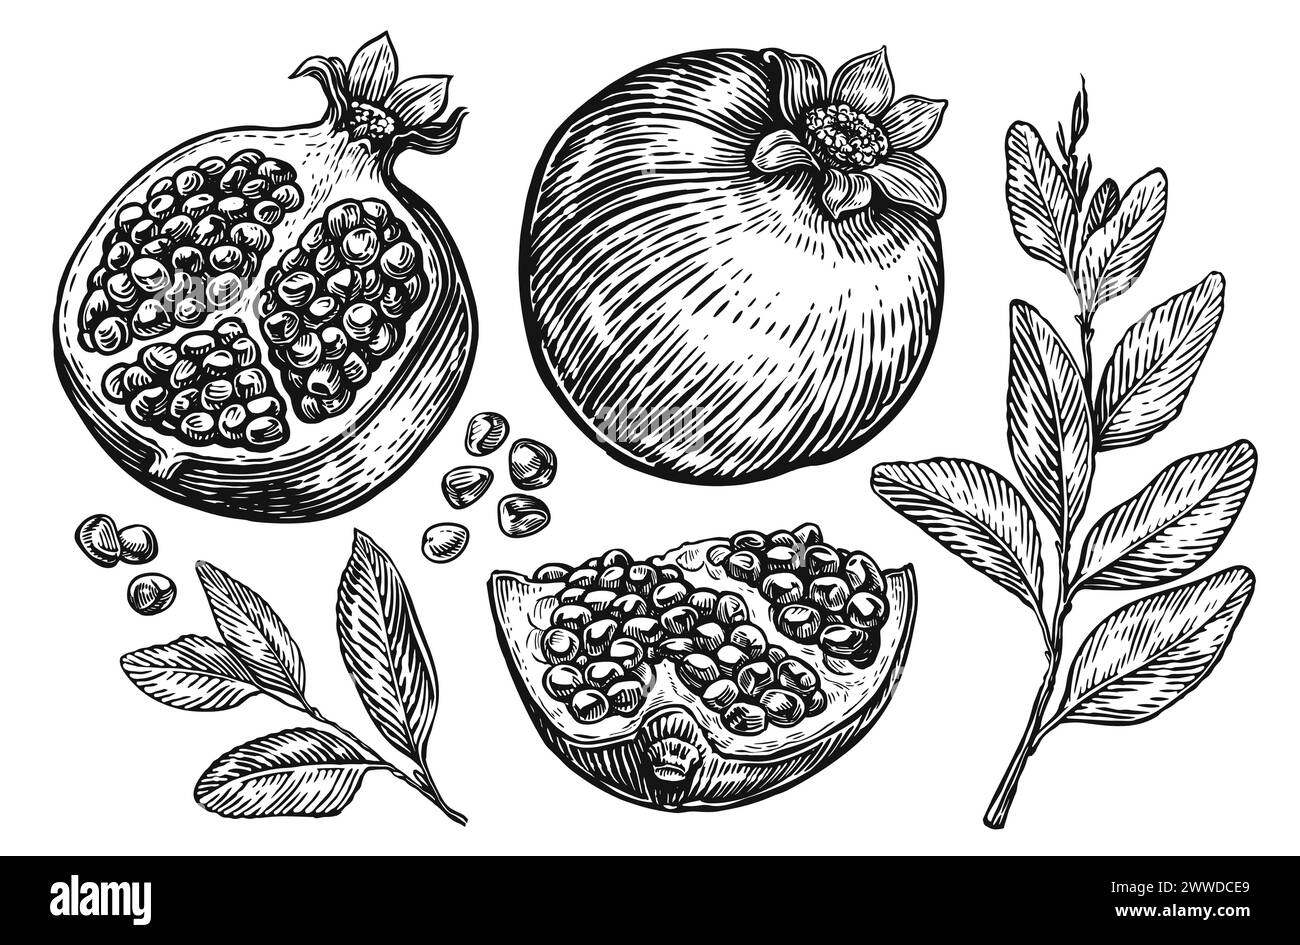 Pomegranate fruits. Isolated set of elements for design. Sketch illustration hand drawn Stock Vector